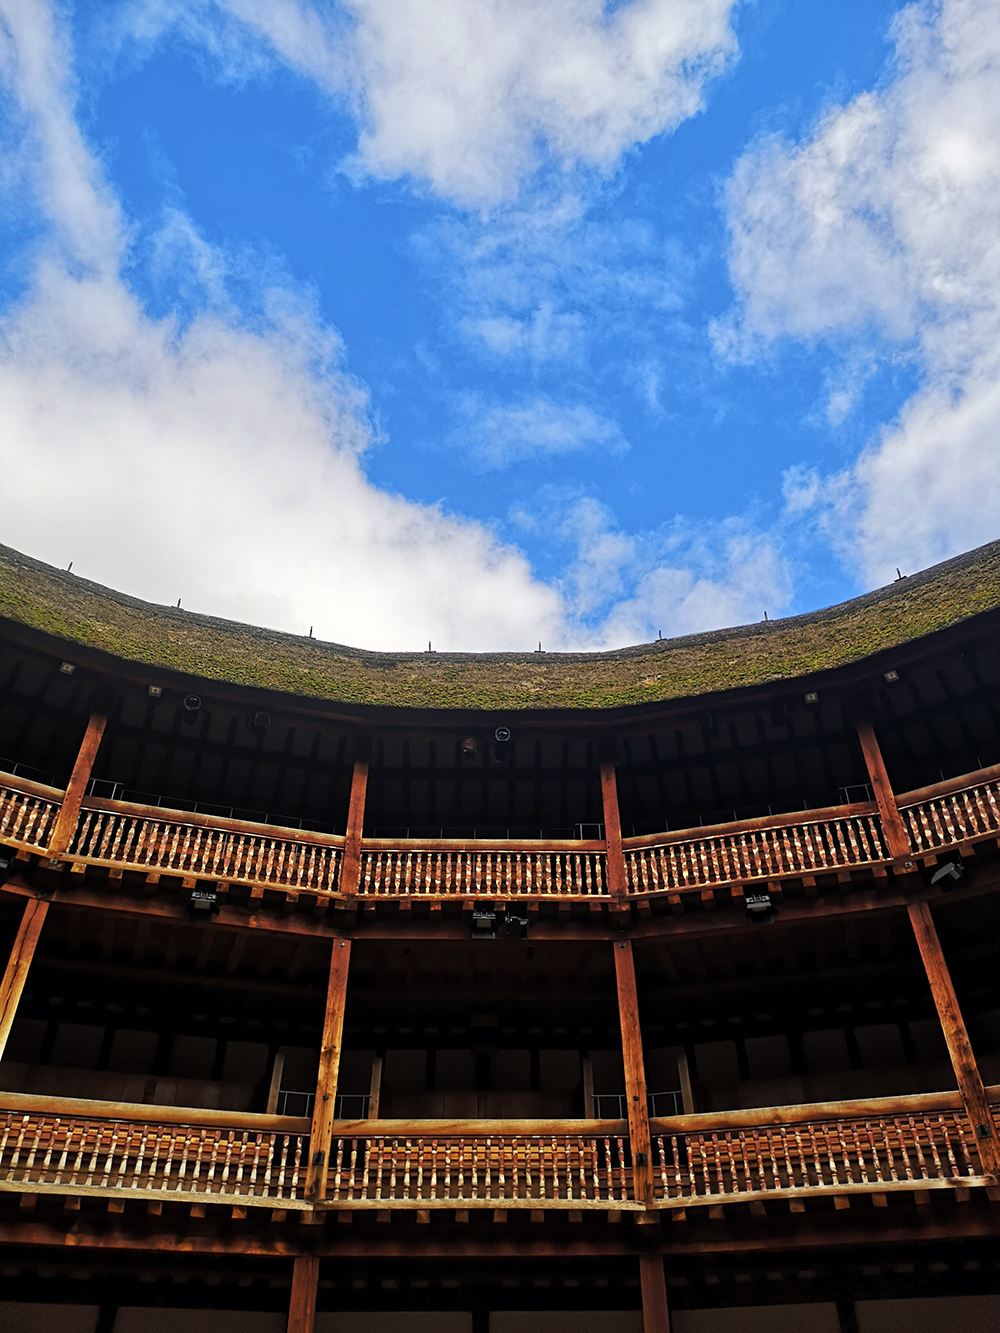 A bright blue sky, with streaks of clouds, above the timber tiered galleries of the Globe Theatre.